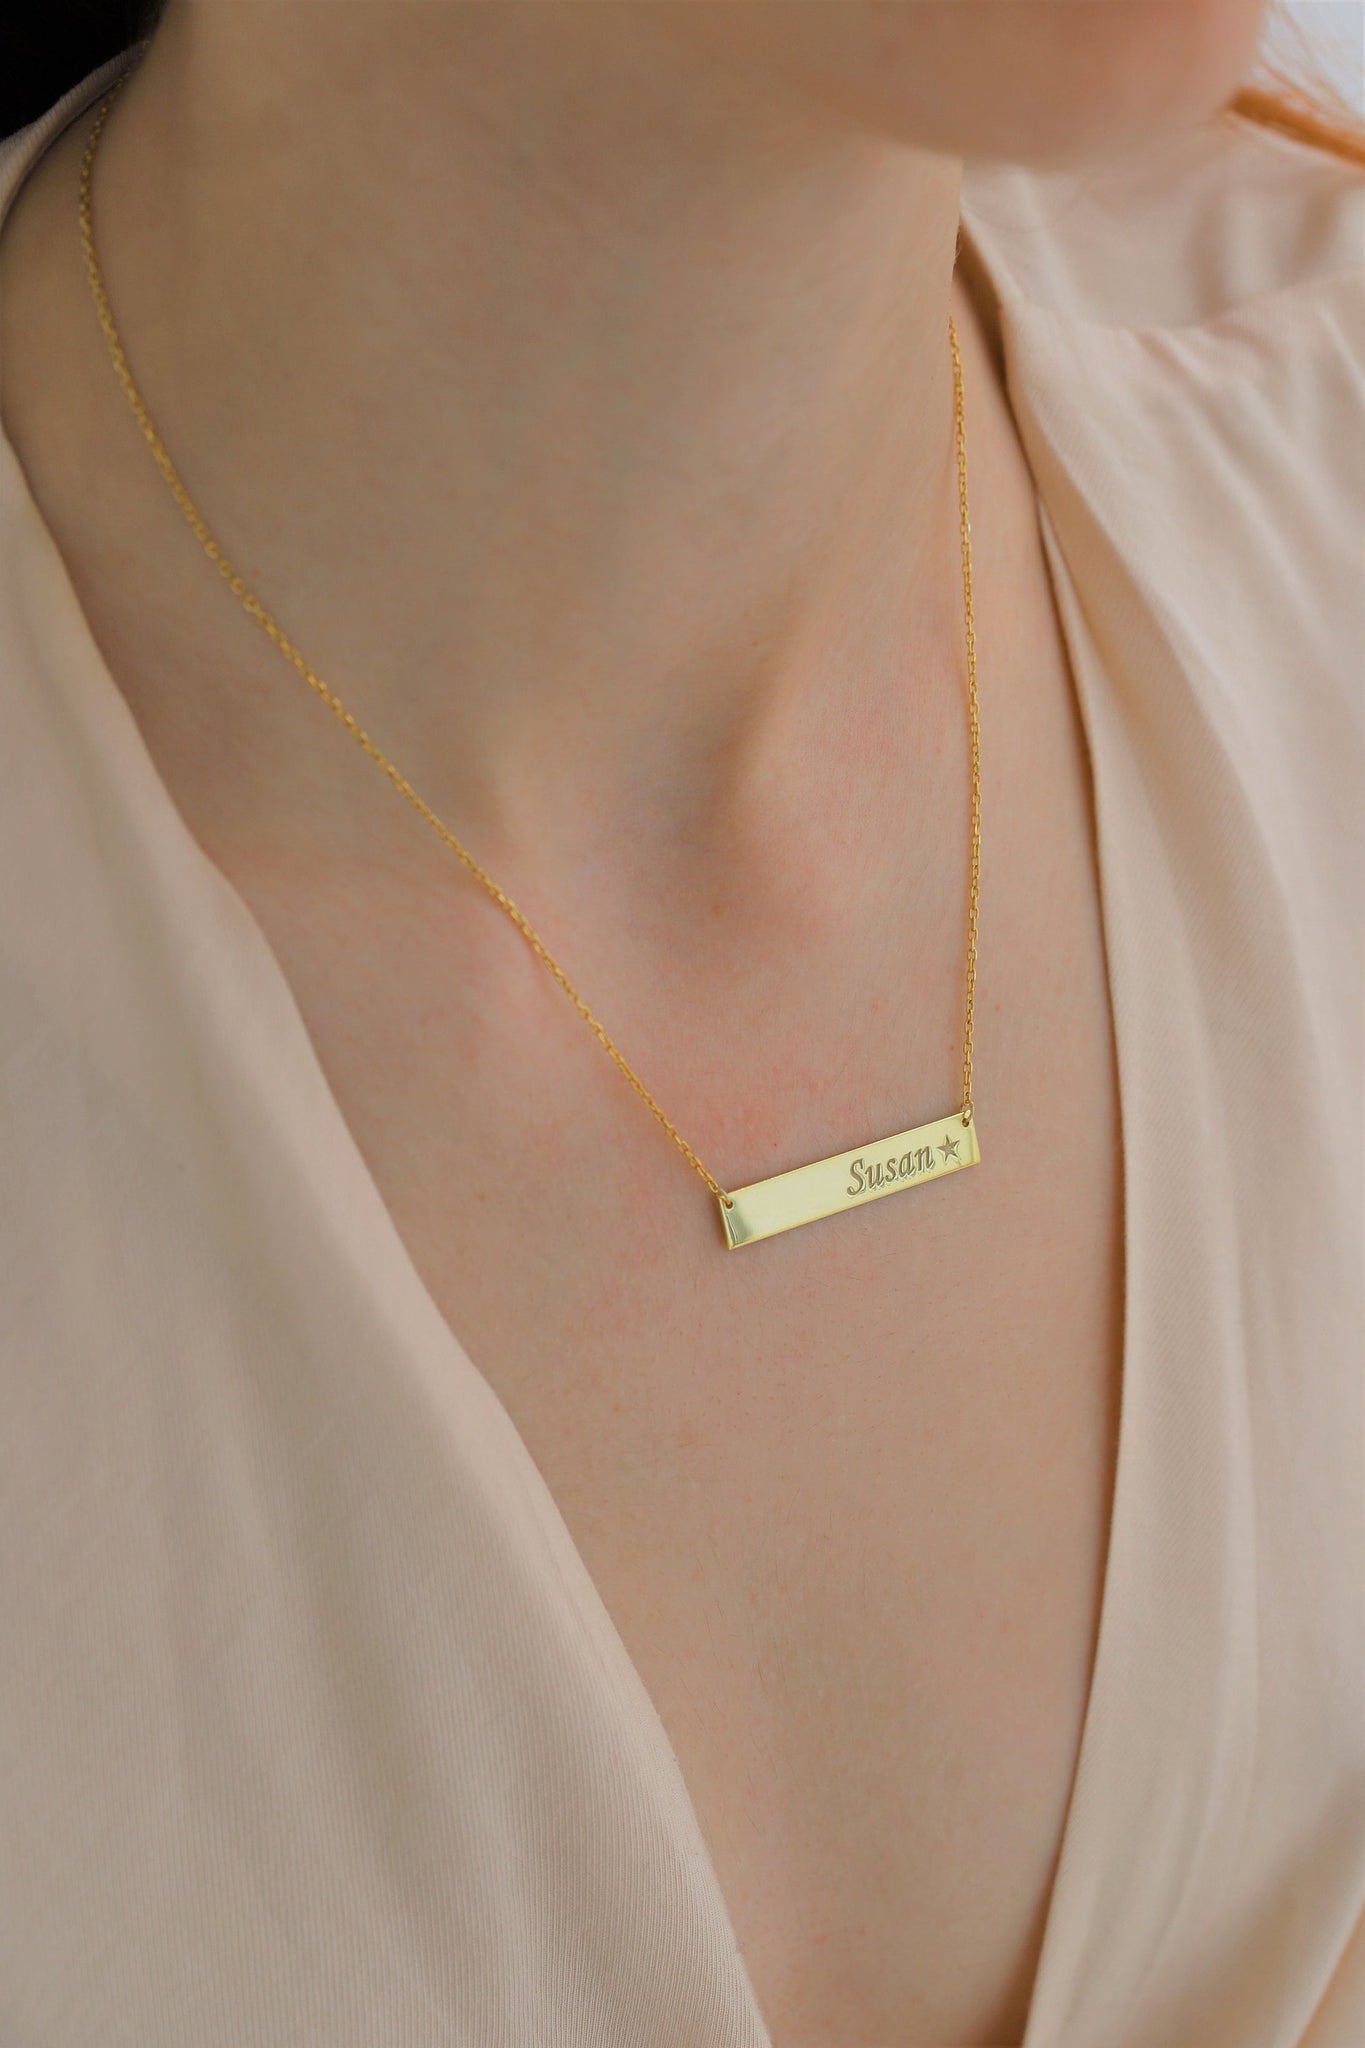 Name Bar Necklace, Gift For Mothers Day, Personalized Name Necklace, Mom Necklace, Minimalist Necklace, To My Mom Necklace,Monogram Necklace